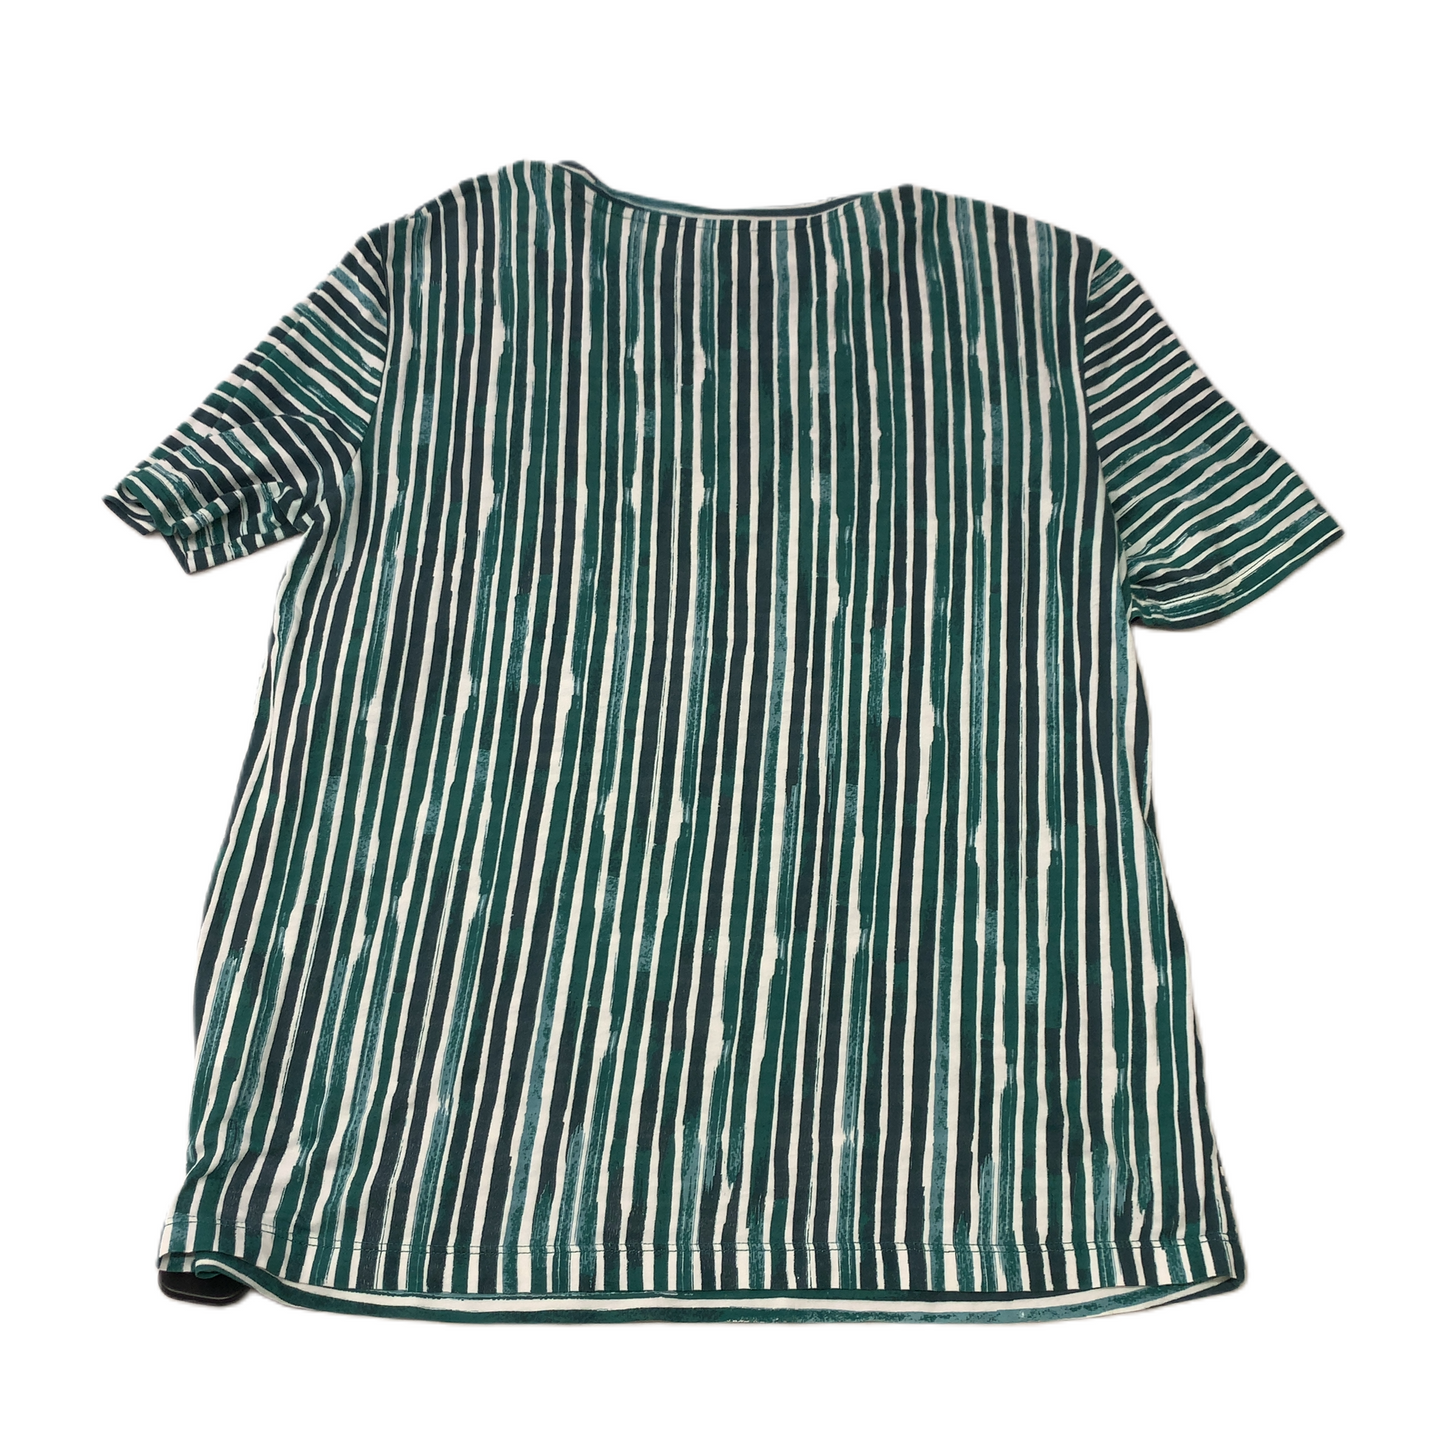 Green & White  Top Short Sleeve Designer By Tory Burch  Size: M